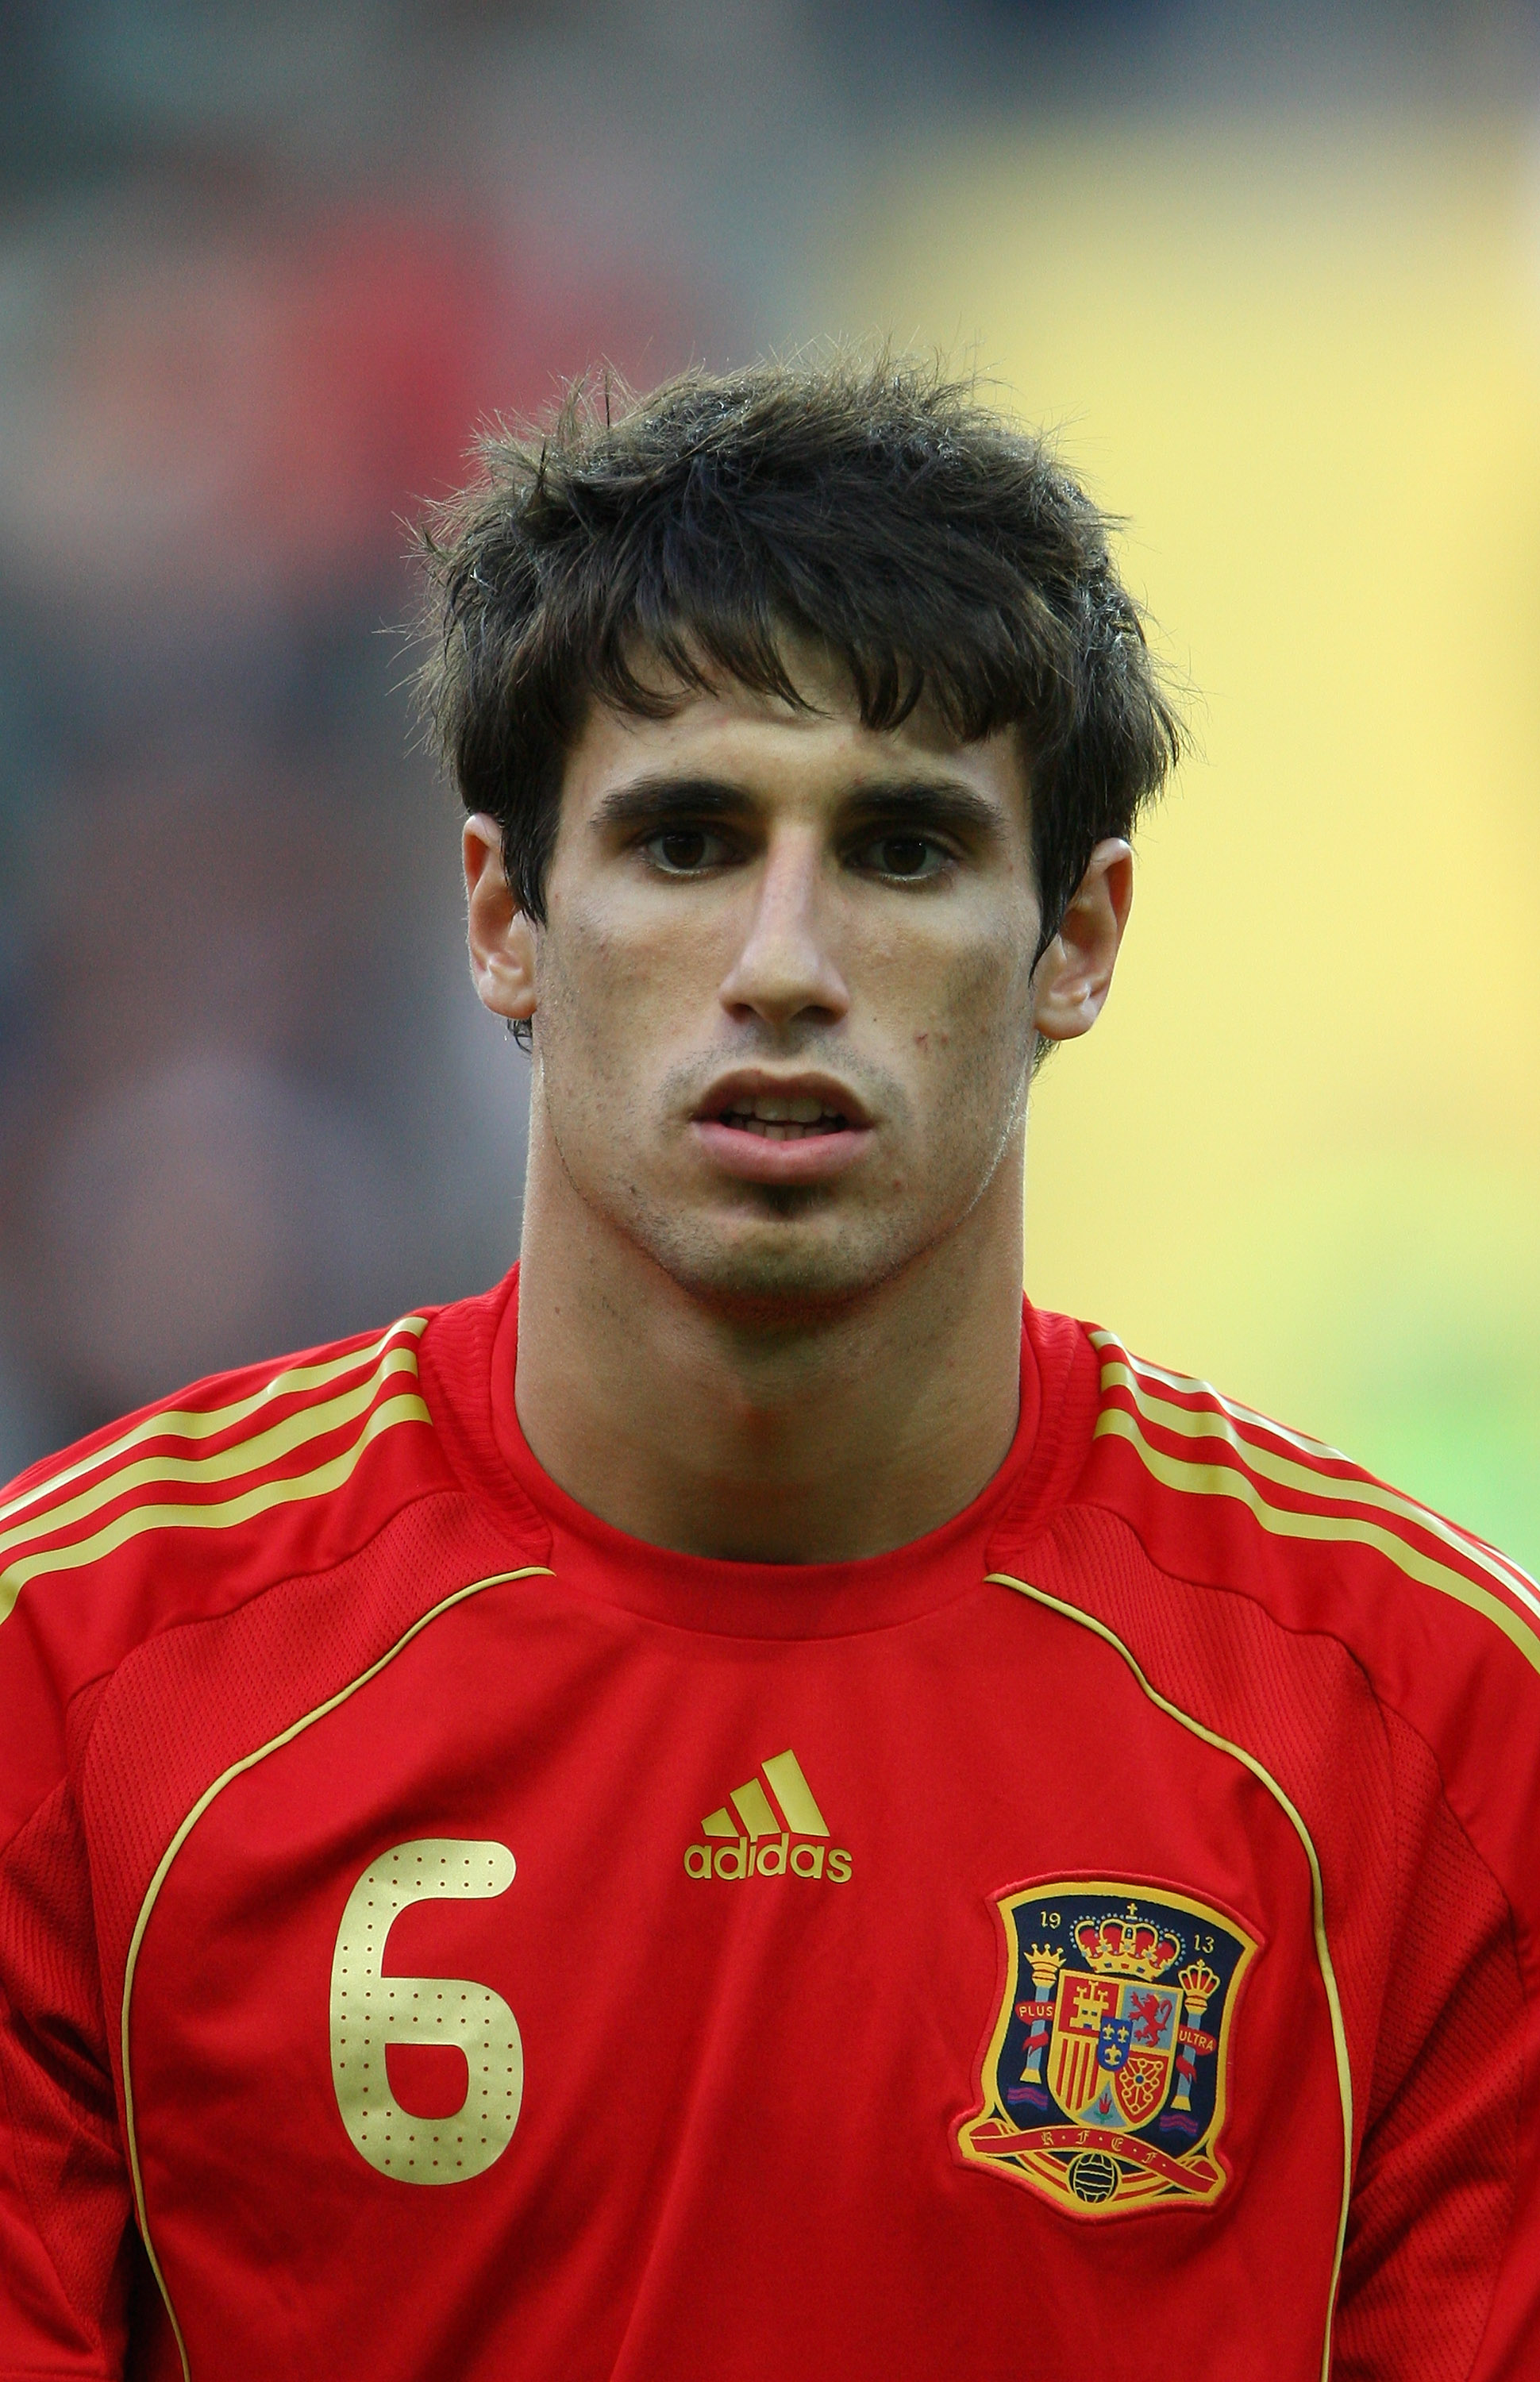 GOTHENBURG, SWEDEN - JUNE 18:  Javi Martinez of Spain during the UEFA U21 European Championships match between England and Spain at the Gamia Ullevi on June 18, 2009 in Gothenburg, Sweden.  (Photo by Phil Cole/Getty Images)